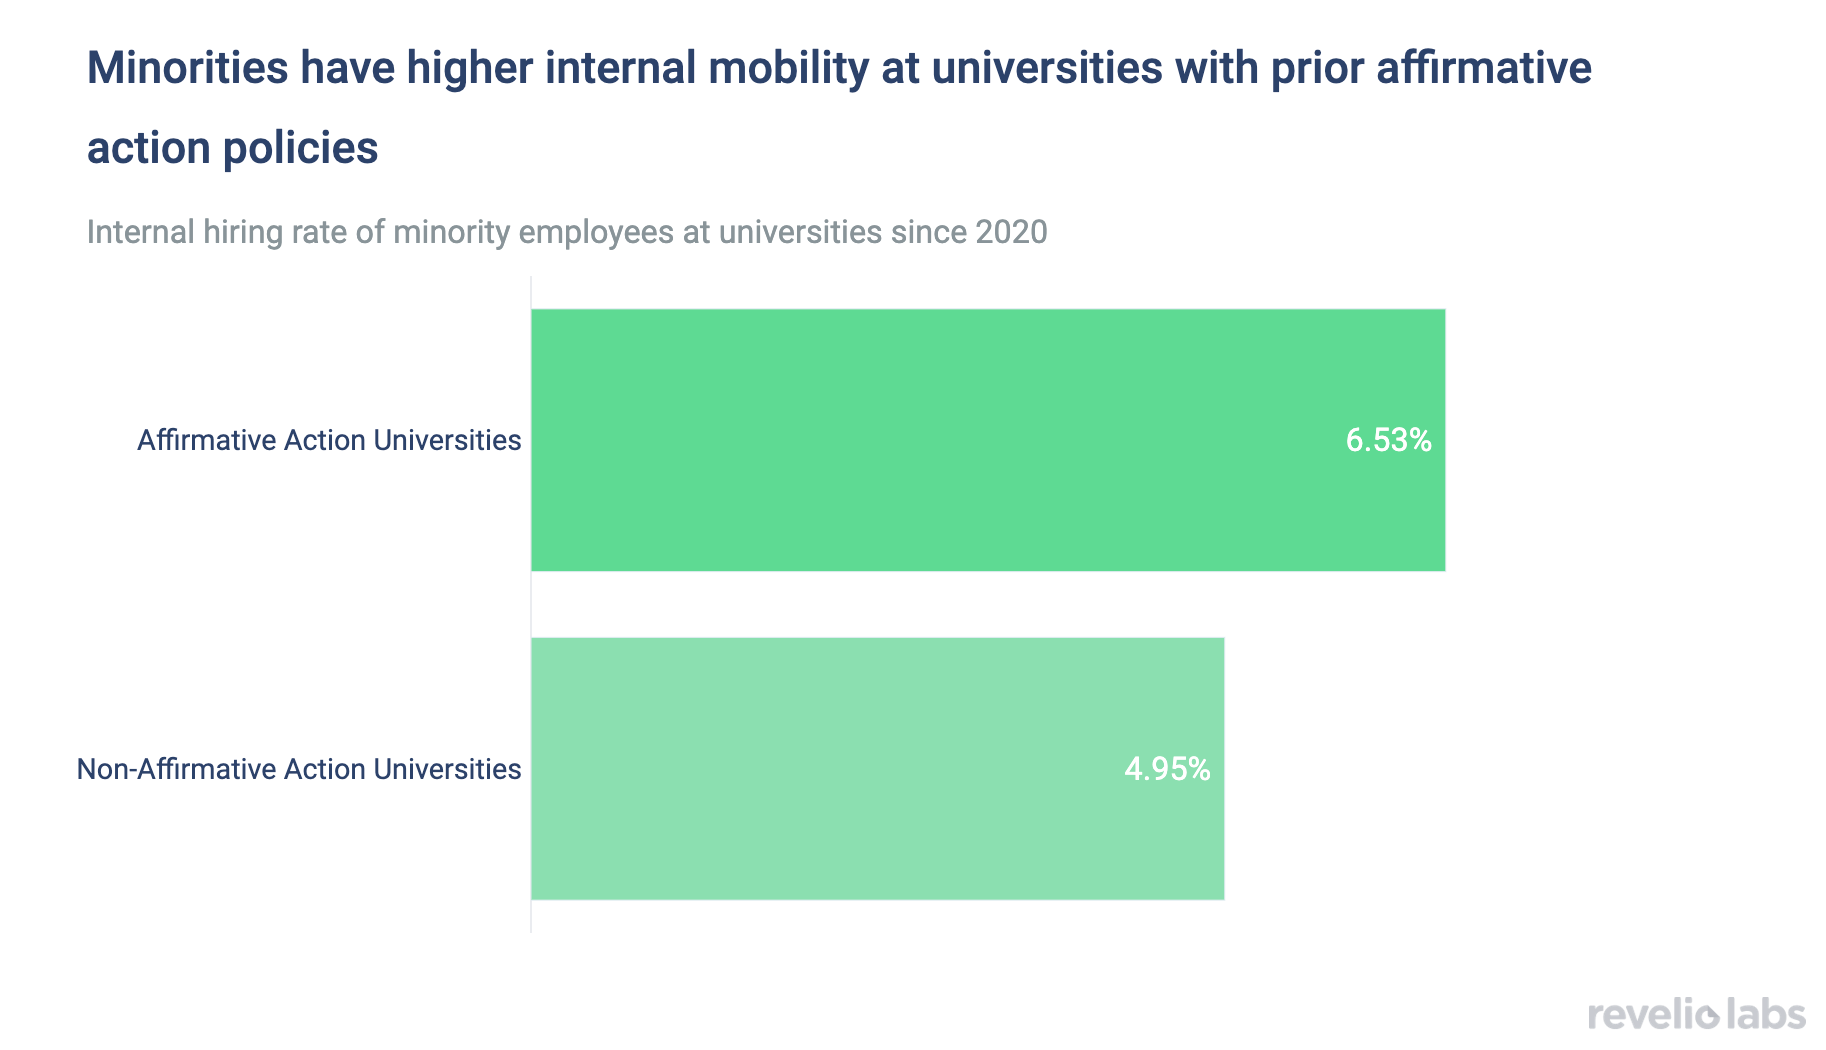 Minorities have higher internal mobility at universities with prior affirmative action policies